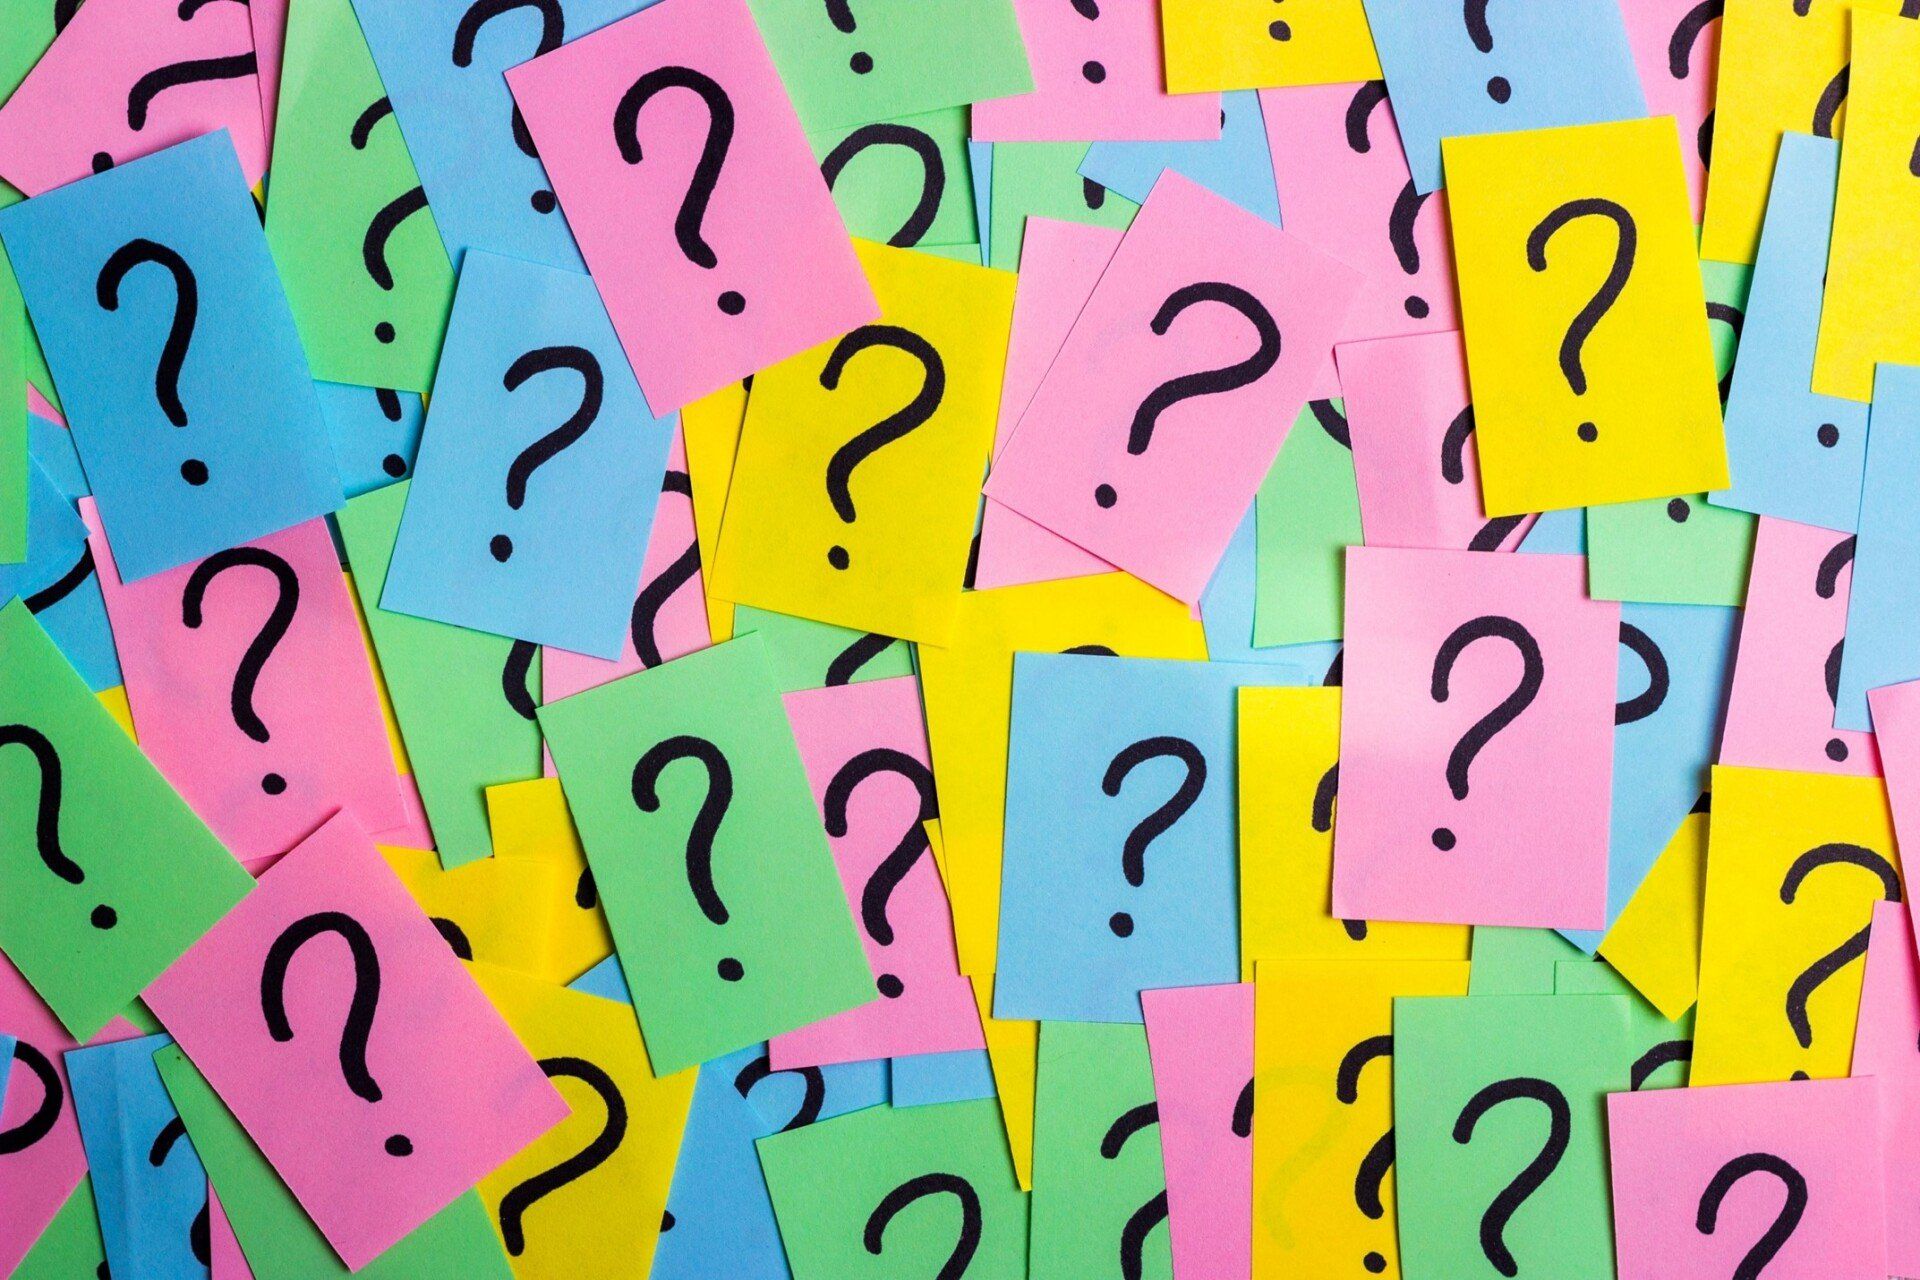 multiple overlapping and multi-colored sticky notes with question marks on the them